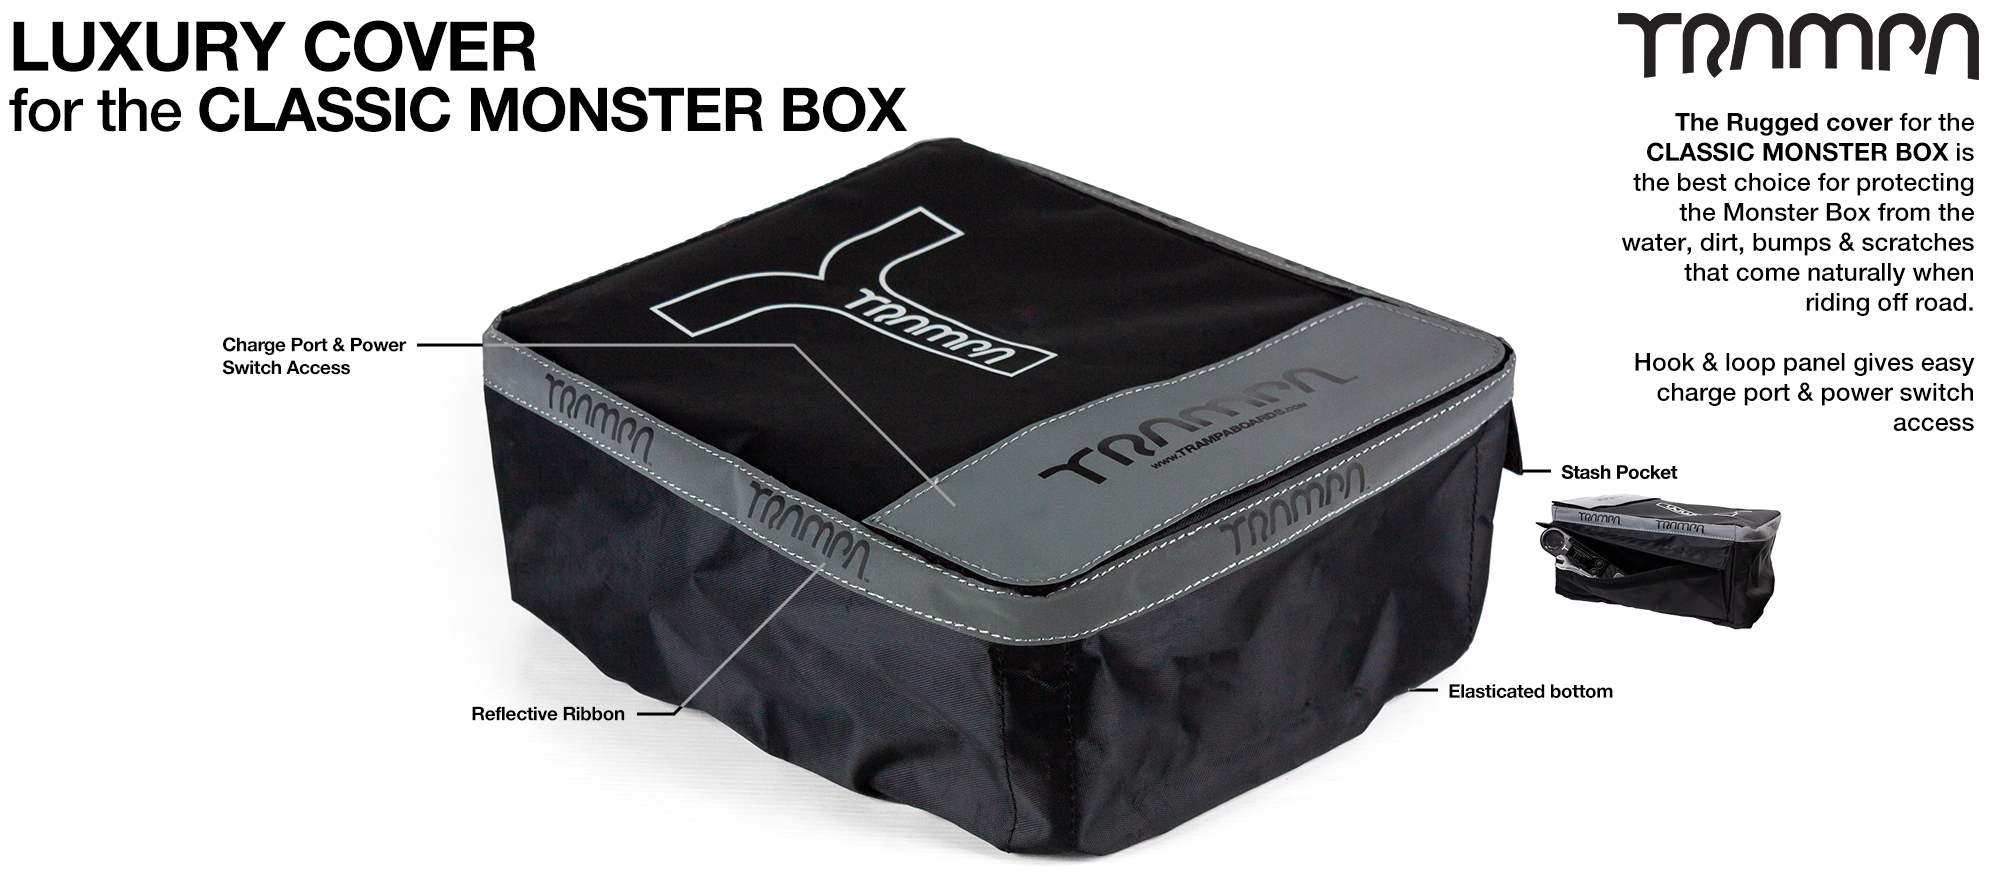 HEAVY DUTY CLASSIC Monster Box protective Cover with Inspection pit & tool Pockets